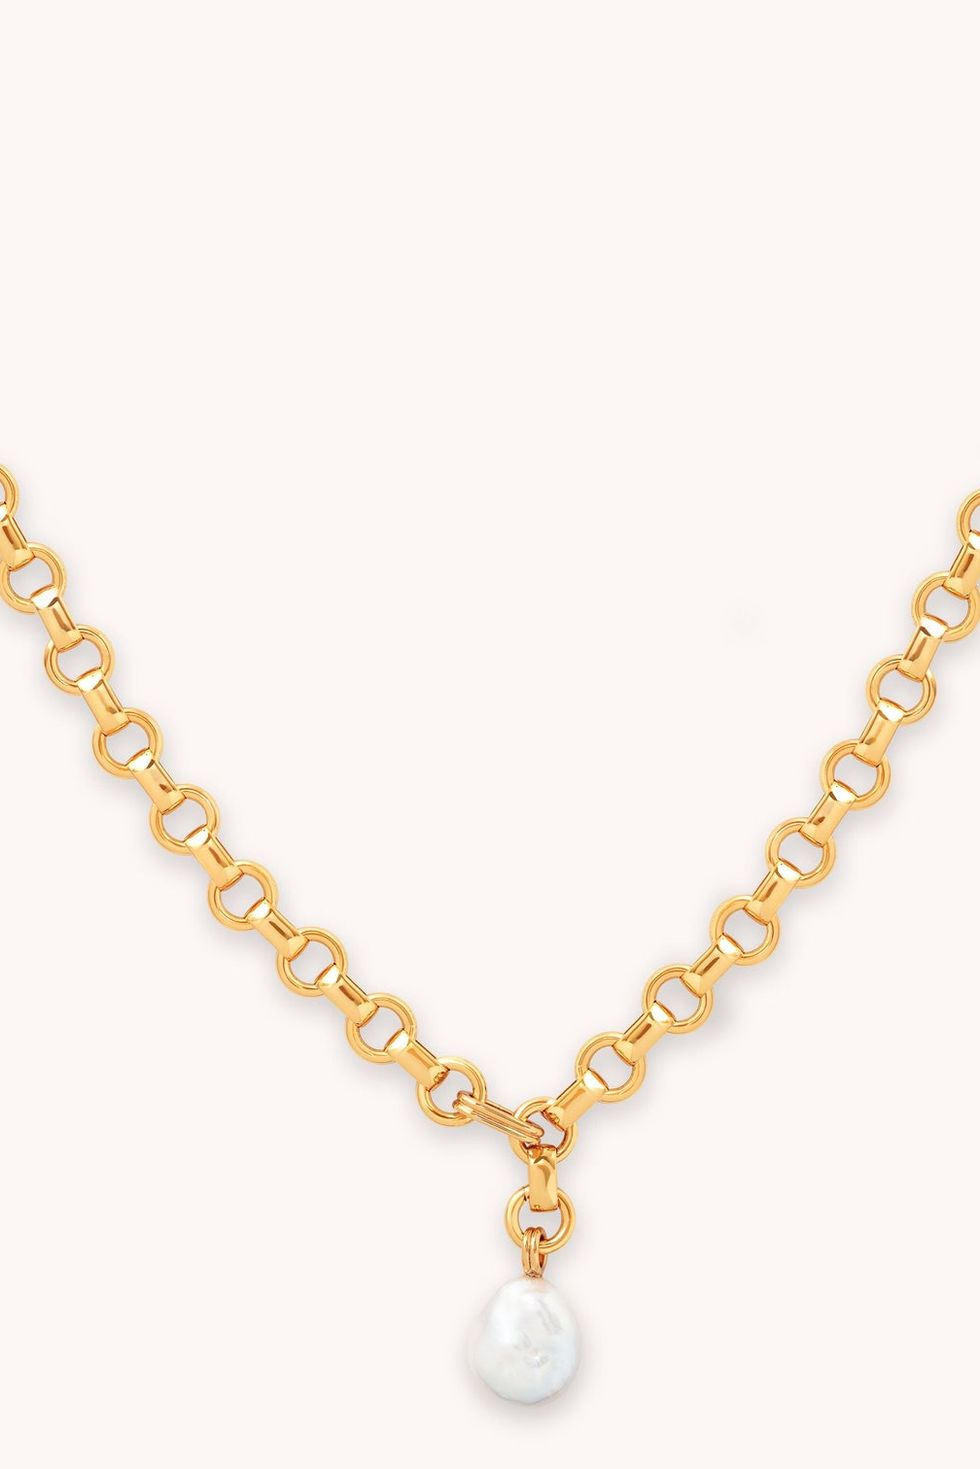 Serenity Pearl Link Chain Necklace in Gold